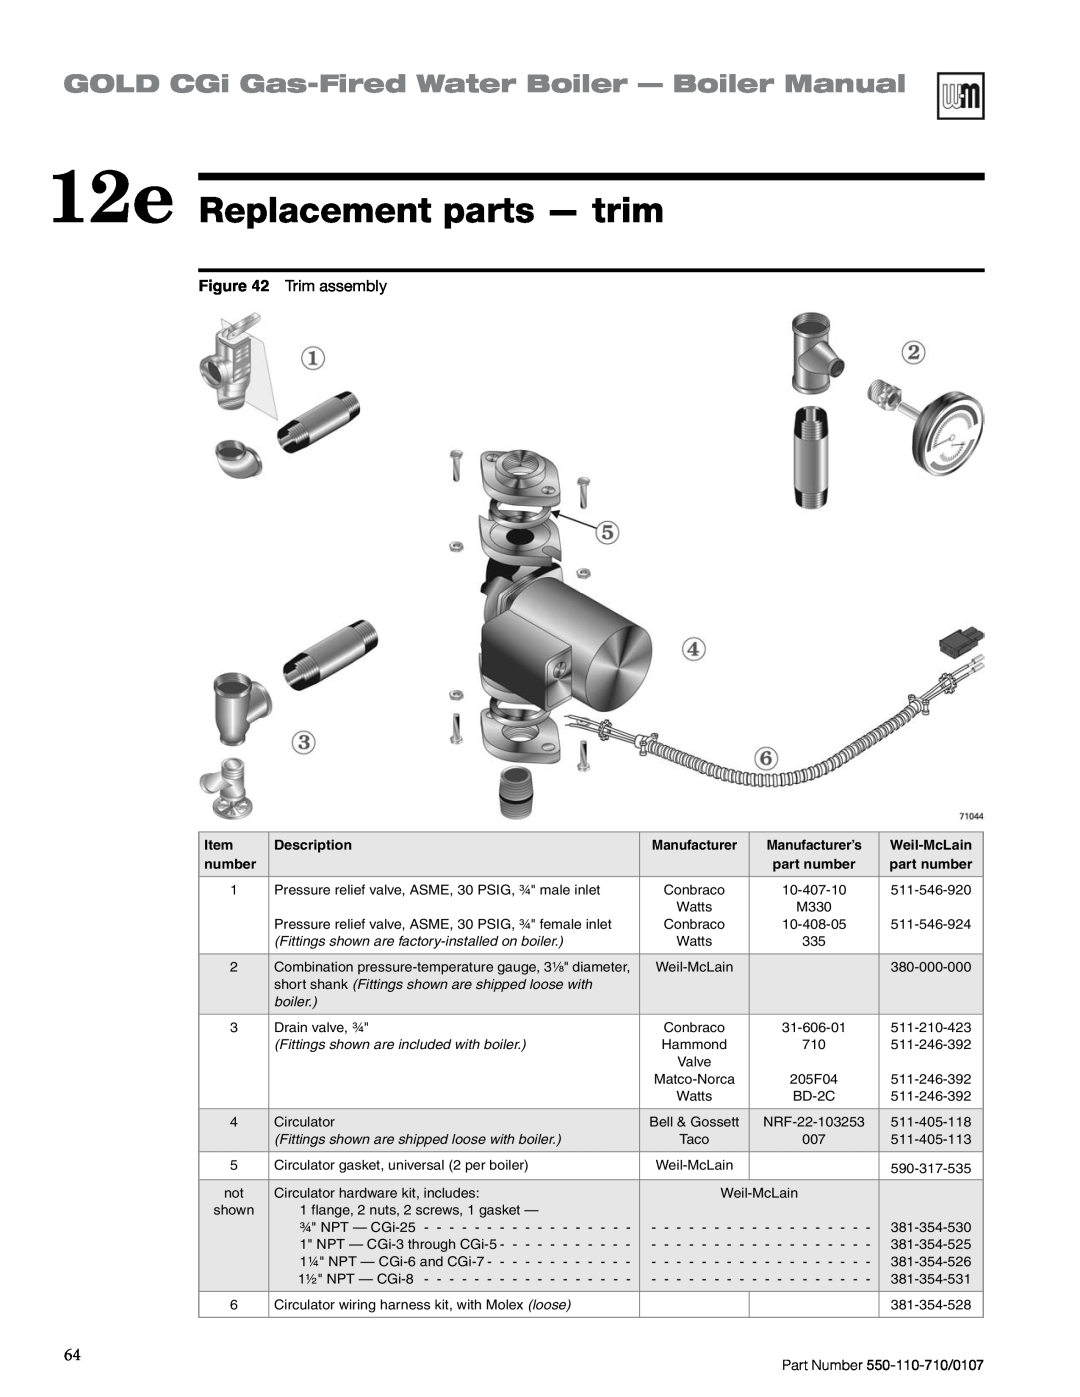 Weil-McLain Series 2 12e Replacement parts — trim, GOLD CGi Gas-FiredWater Boiler — Boiler Manual, Trim assembly, number 